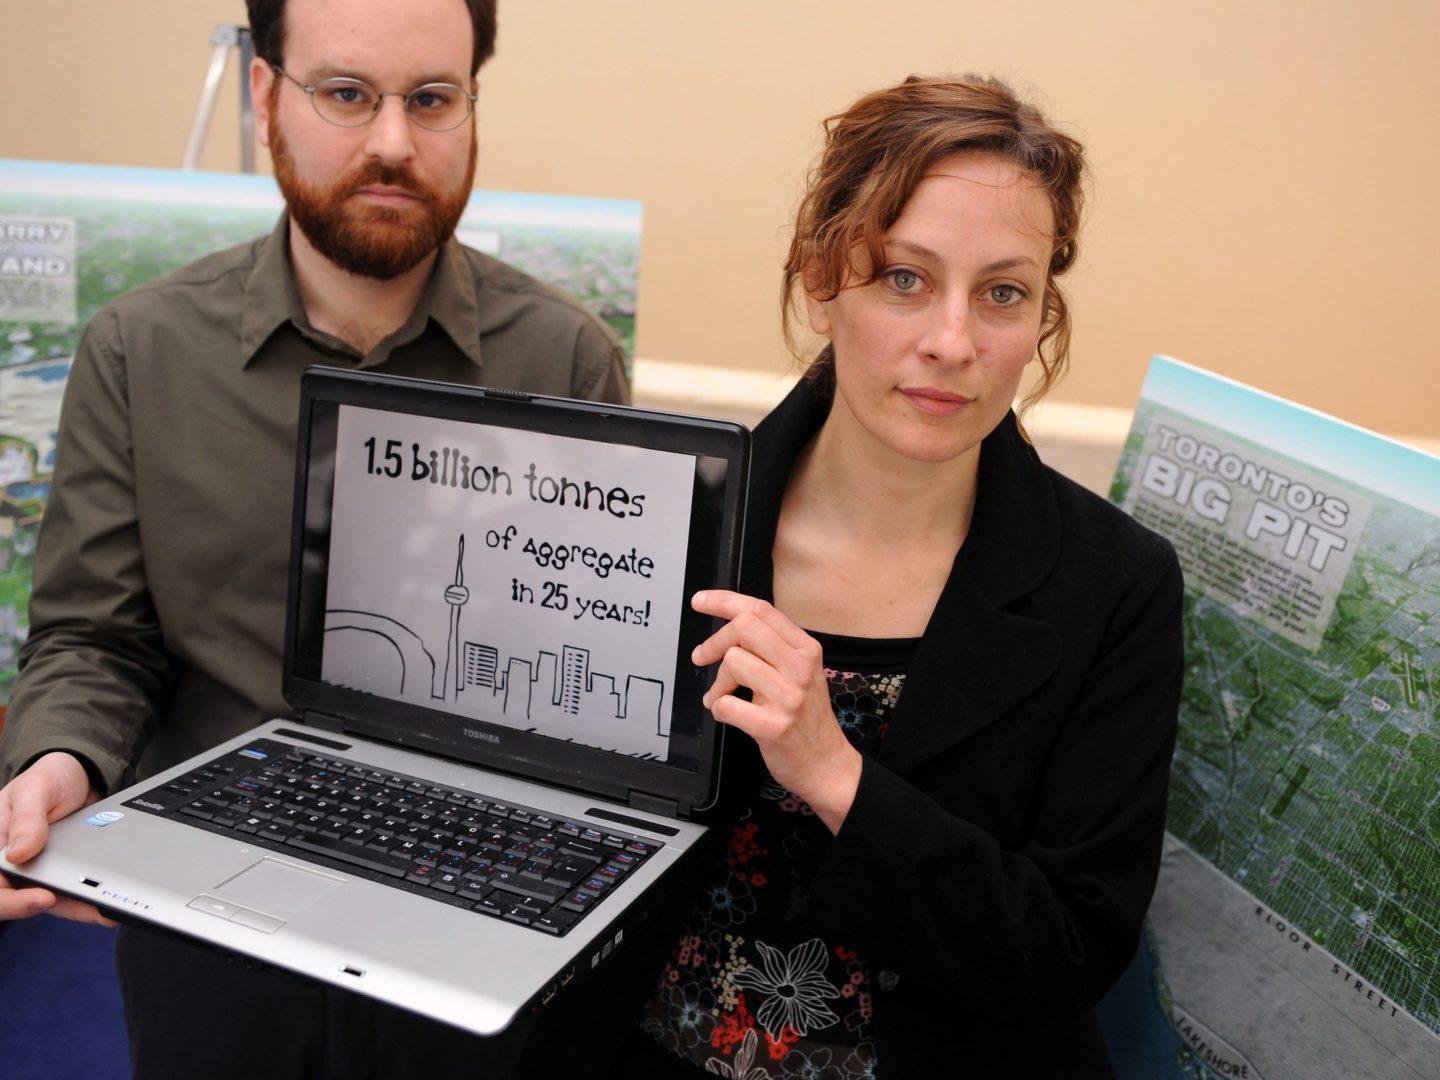 White woman and man holding computer